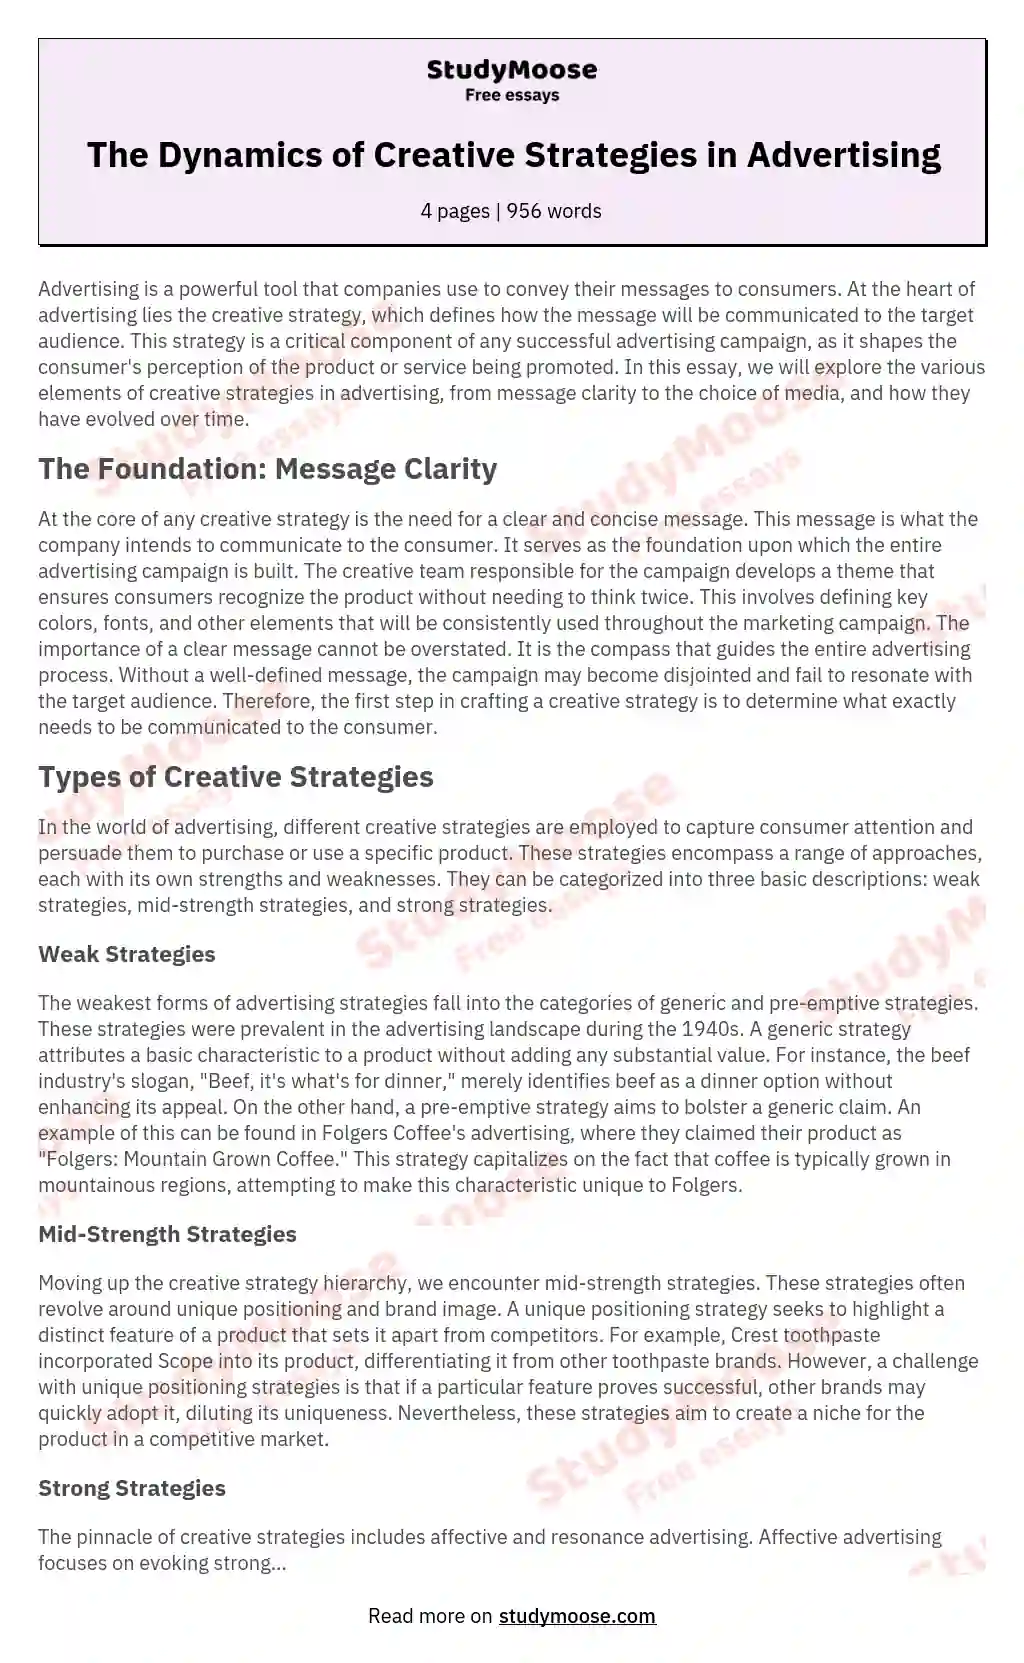 The Dynamics of Creative Strategies in Advertising essay